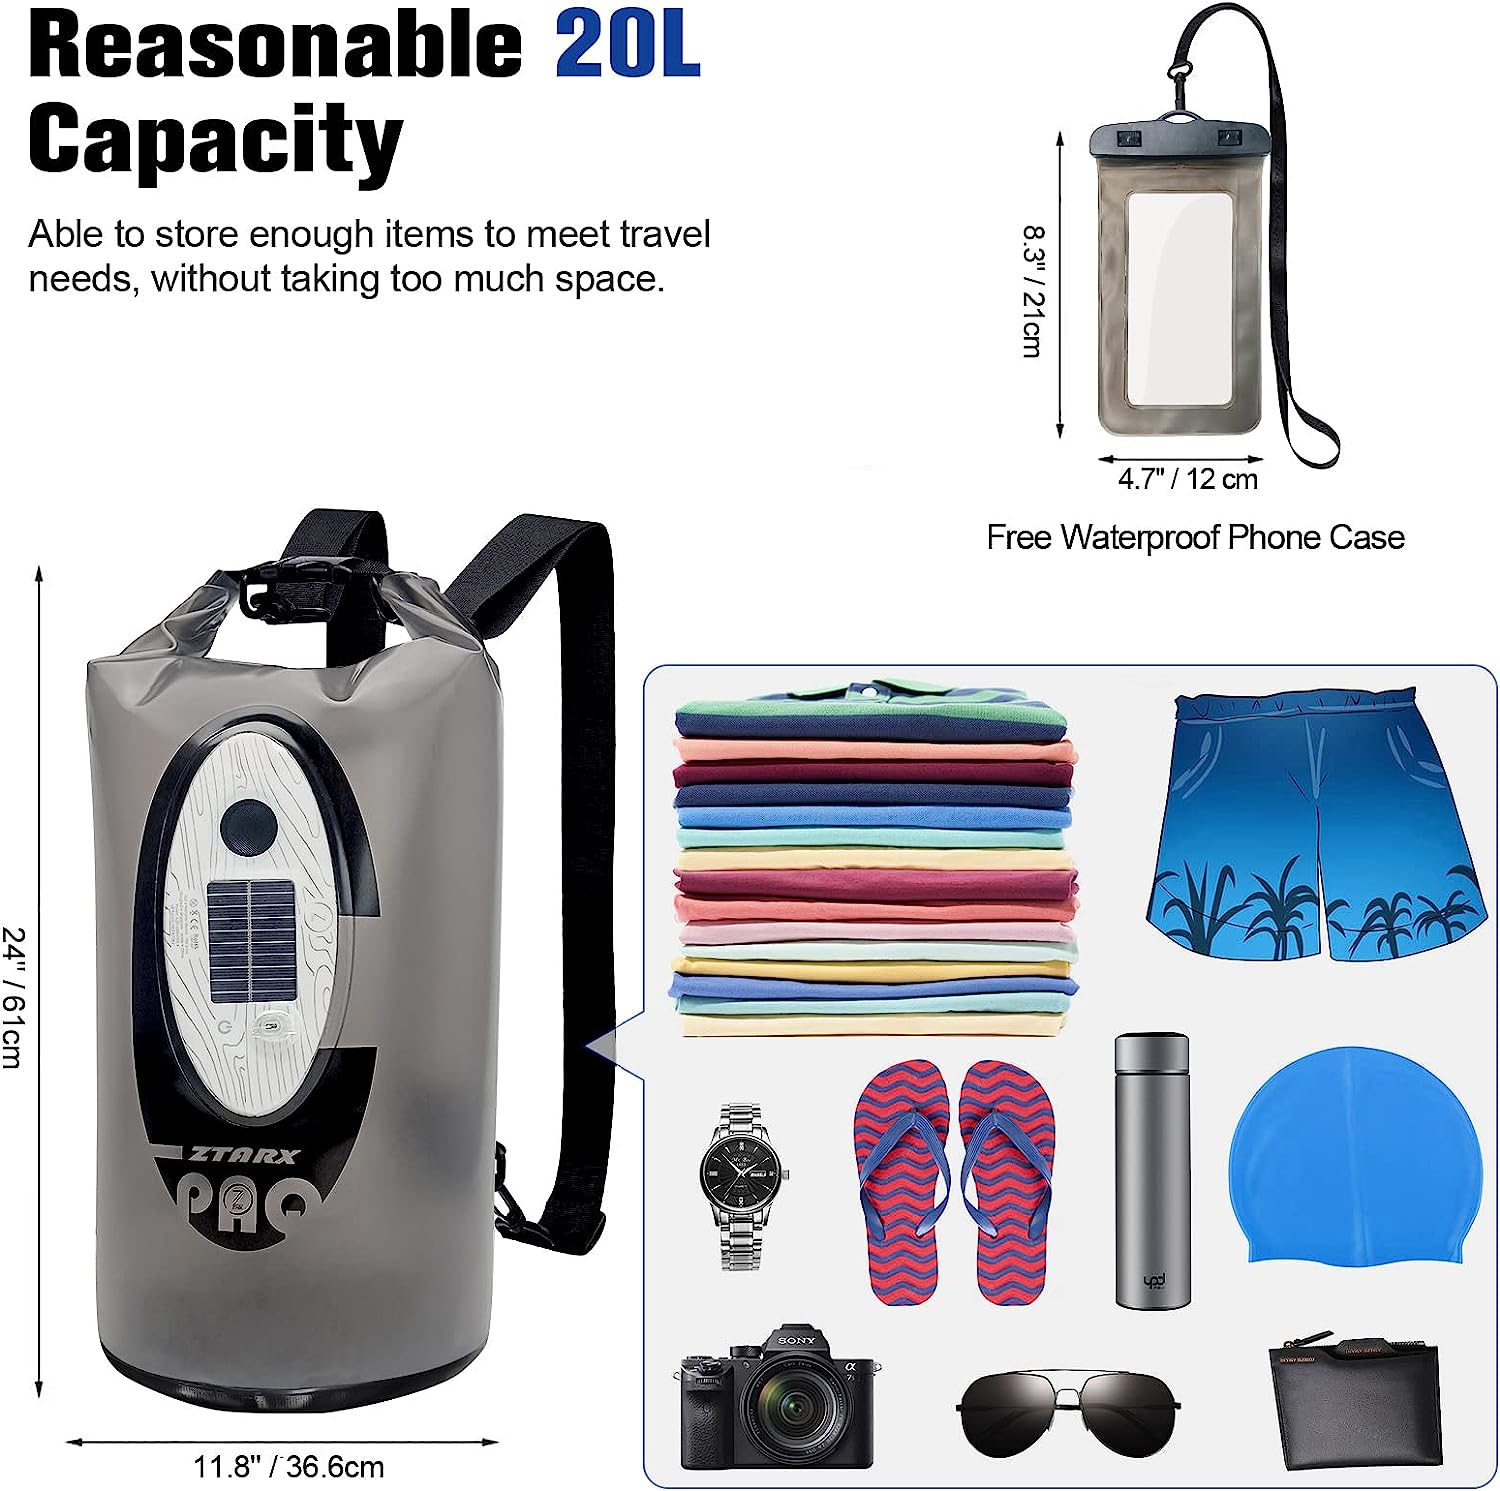 Ztarx S20-PVC-R02 Bluetooth Speaker Dry Bag: Features, Specs, and More